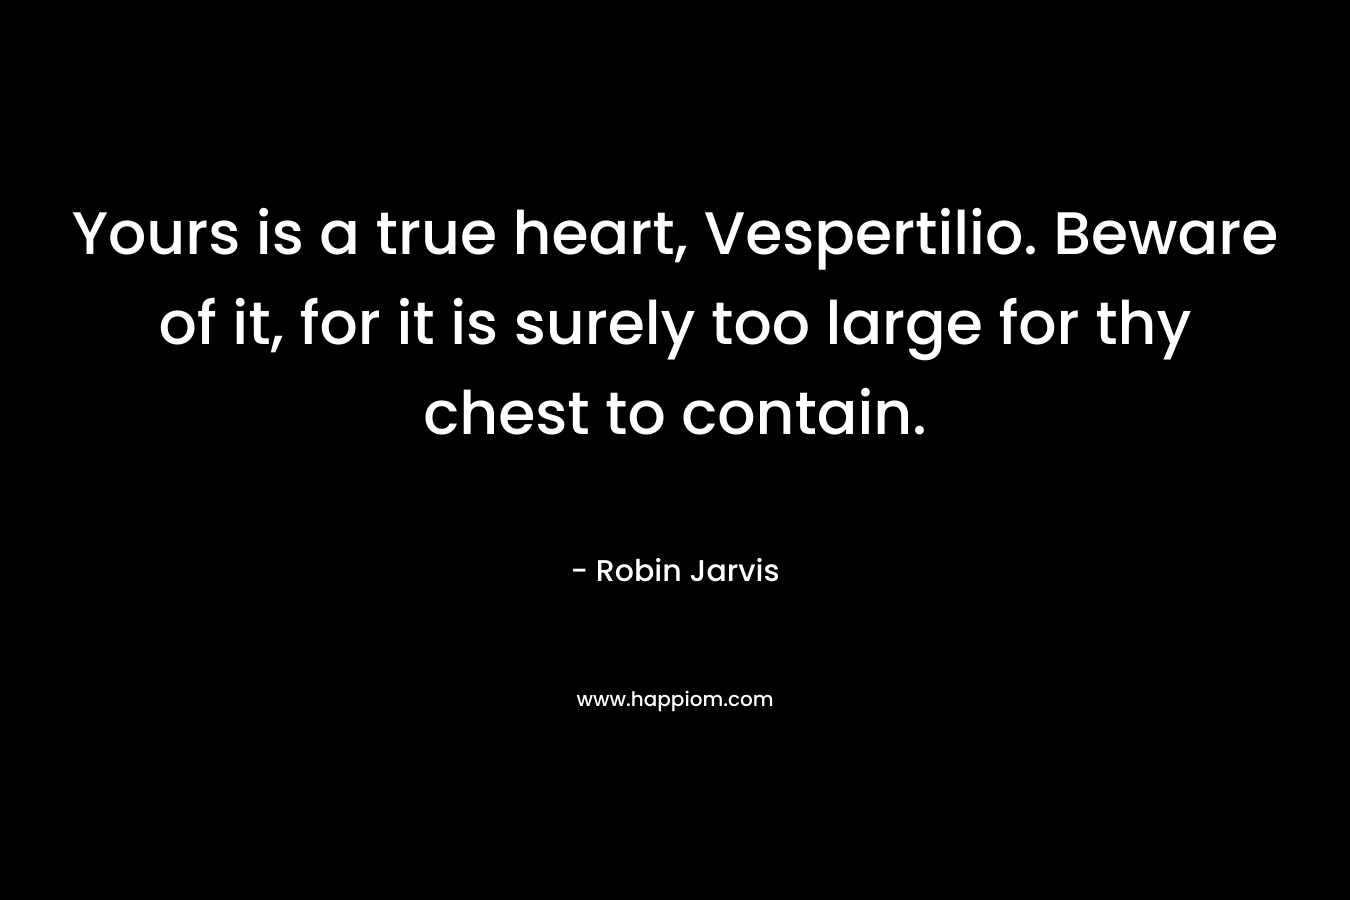 Yours is a true heart, Vespertilio. Beware of it, for it is surely too large for thy chest to contain. – Robin Jarvis